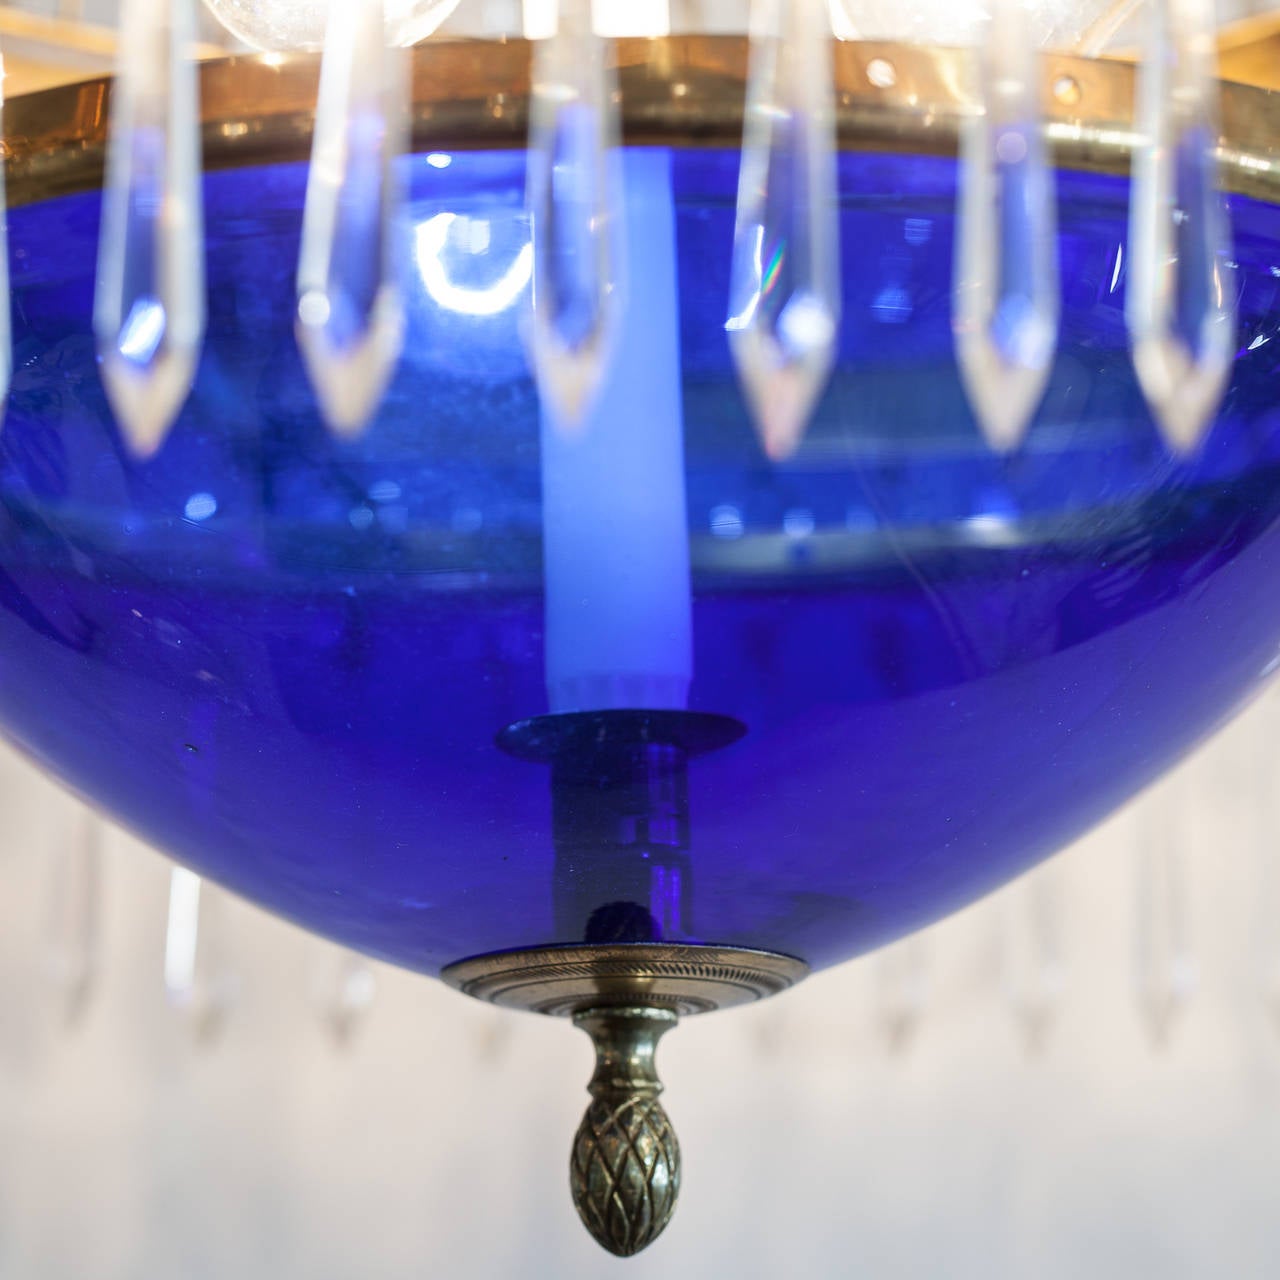 This splendid chandelier in the Gustavian Style has the original cobalt blue hanging basket and blue bobeche. it has six candles around the rim and one candle in the middle of the blue bowl. There are three electric lights in the middle. It has been